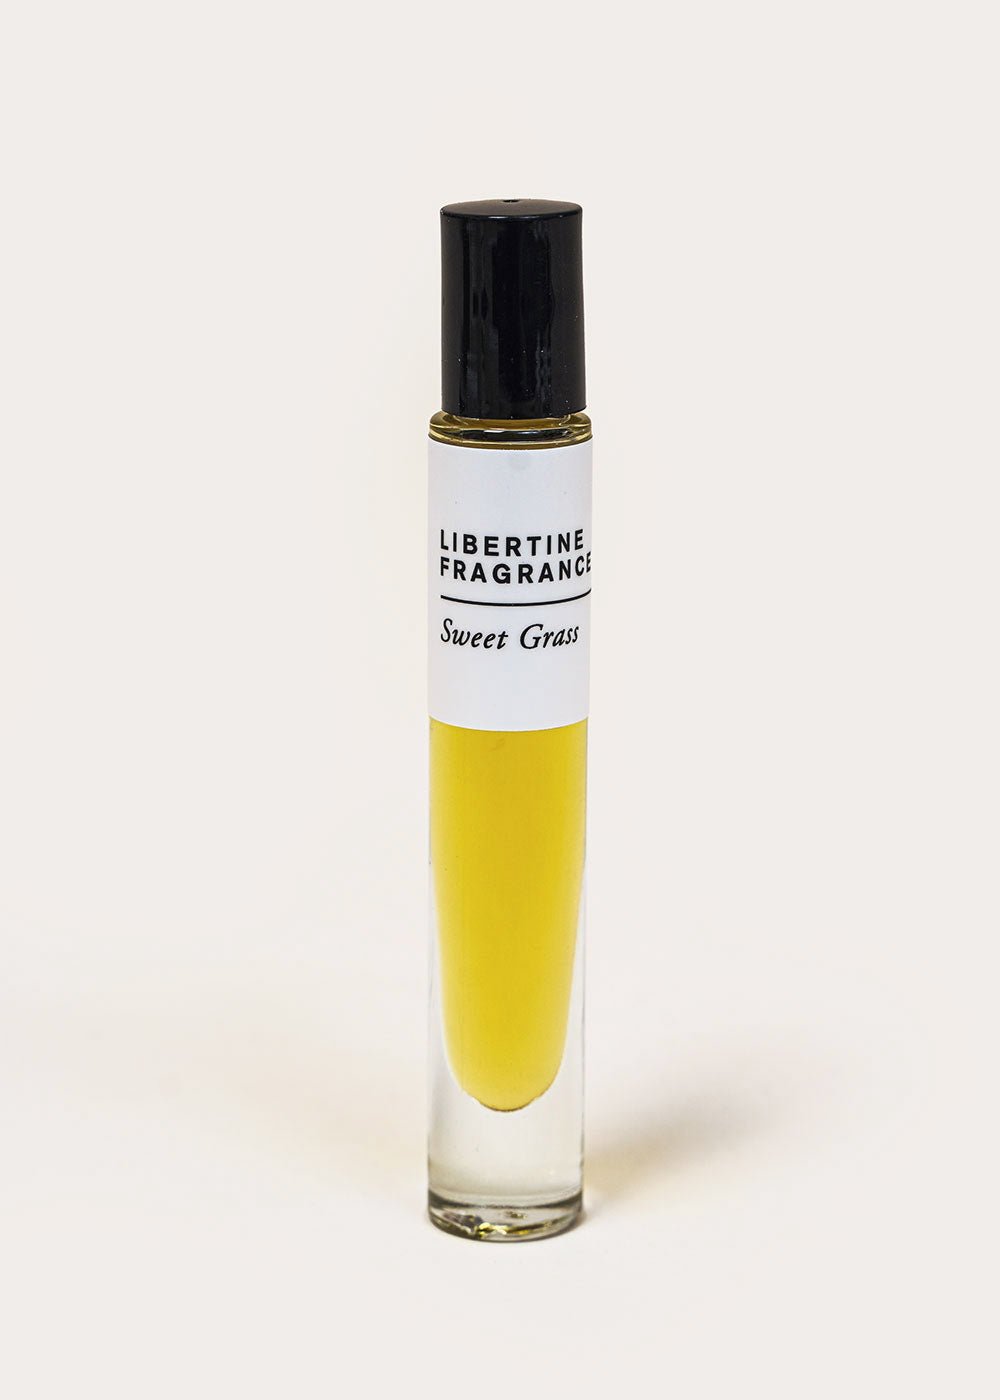 Libertine Fragrance Sweet Grass Perfume Oil - New Classics Studios Sustainable Ethical Fashion Canada